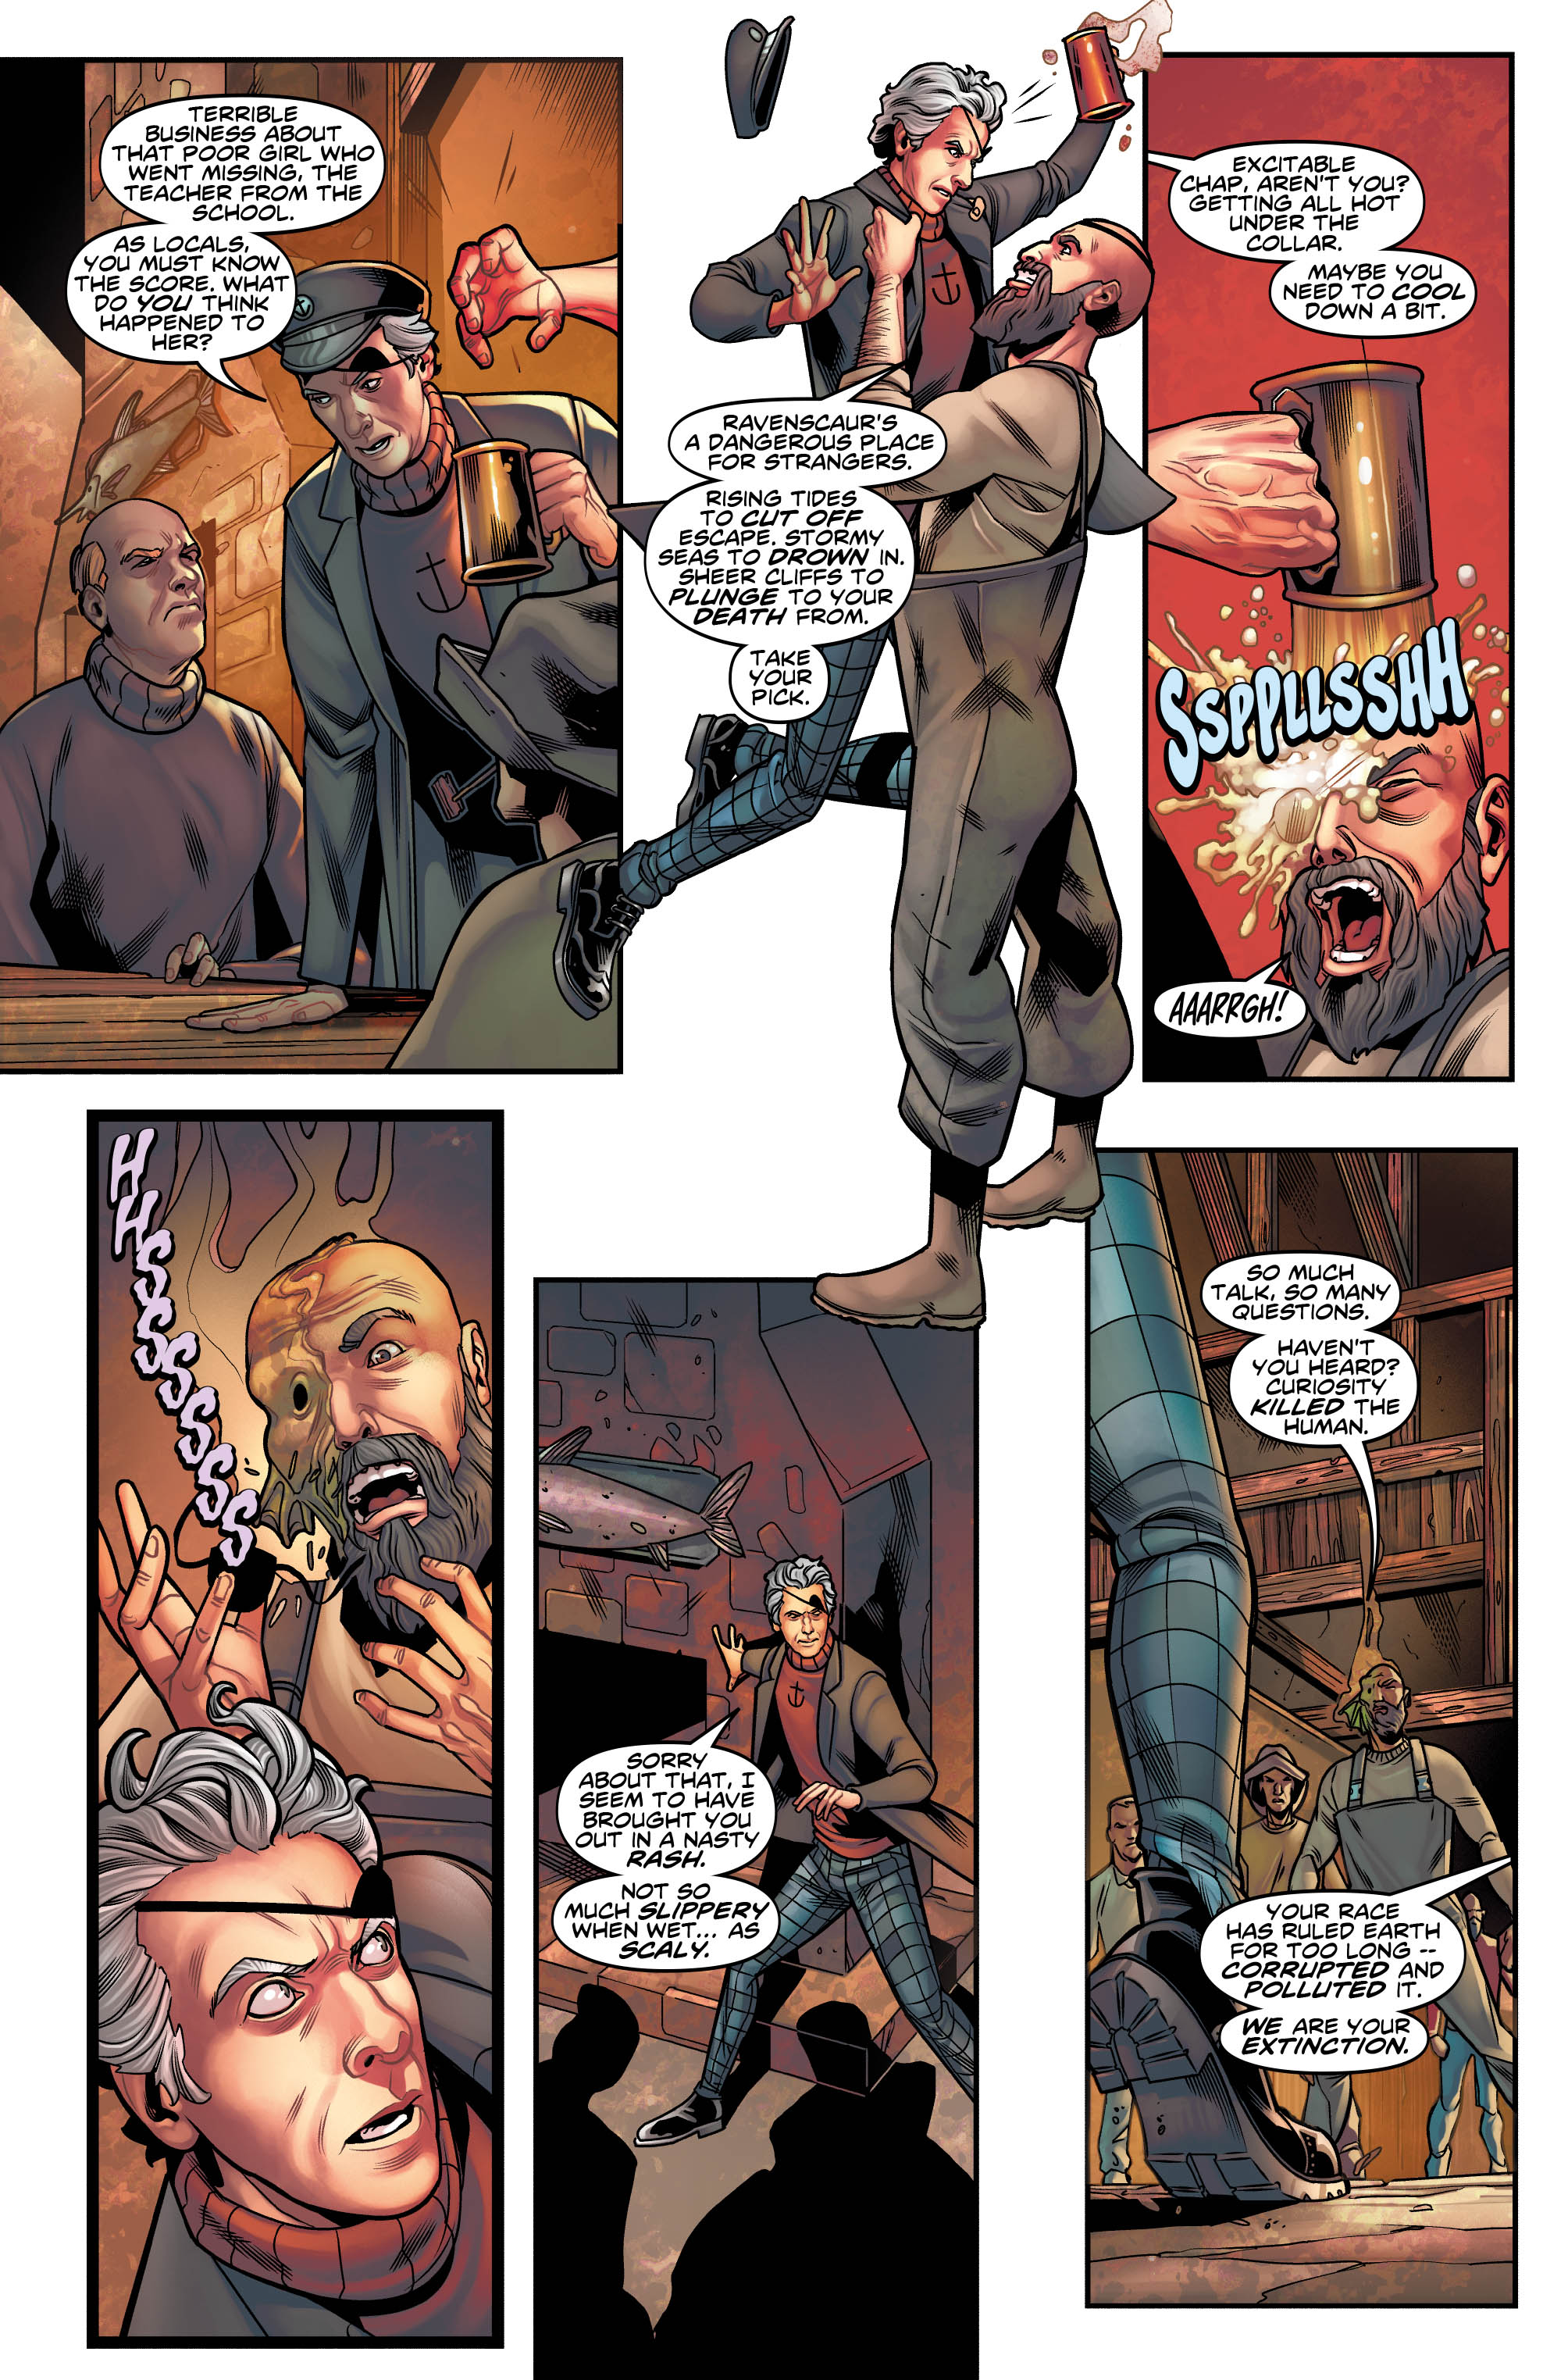 Doctor Who: The Twelfth Doctor #2.2 Preview Page